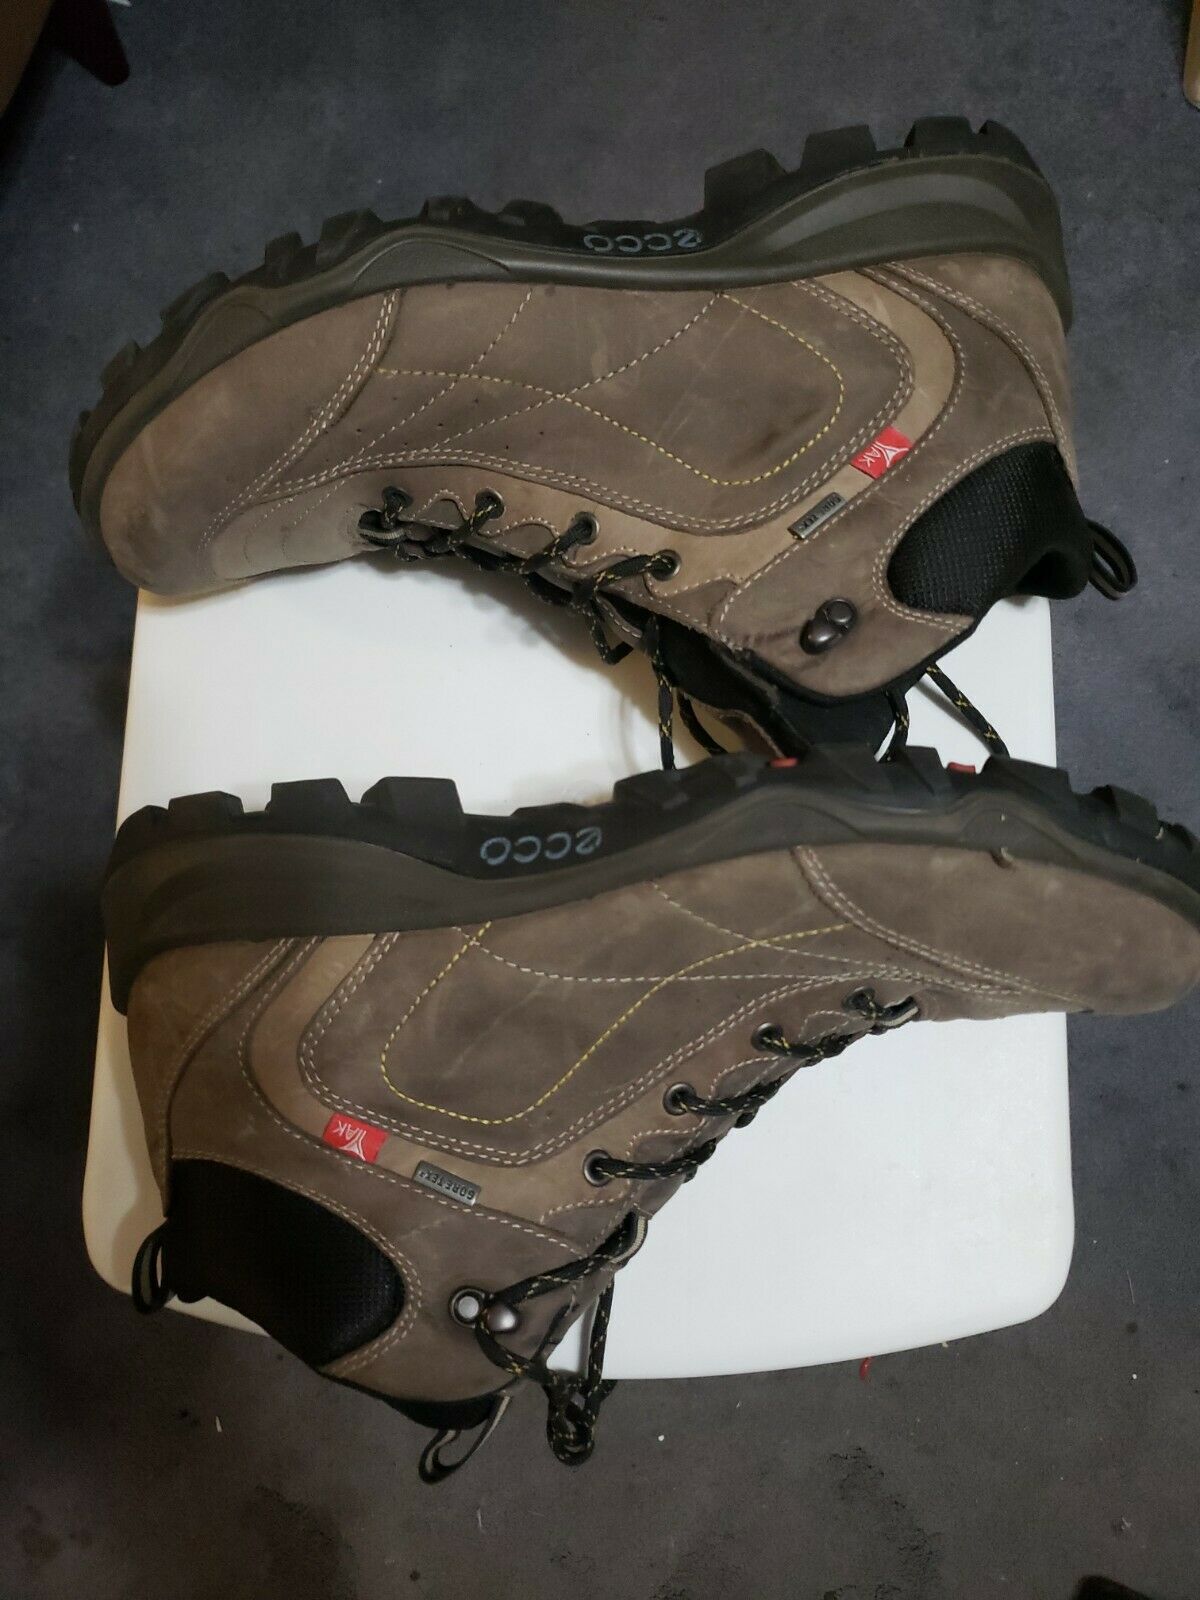 Ecco Yak Hiking Trail Boots Great Condition 47 Europe 13 US